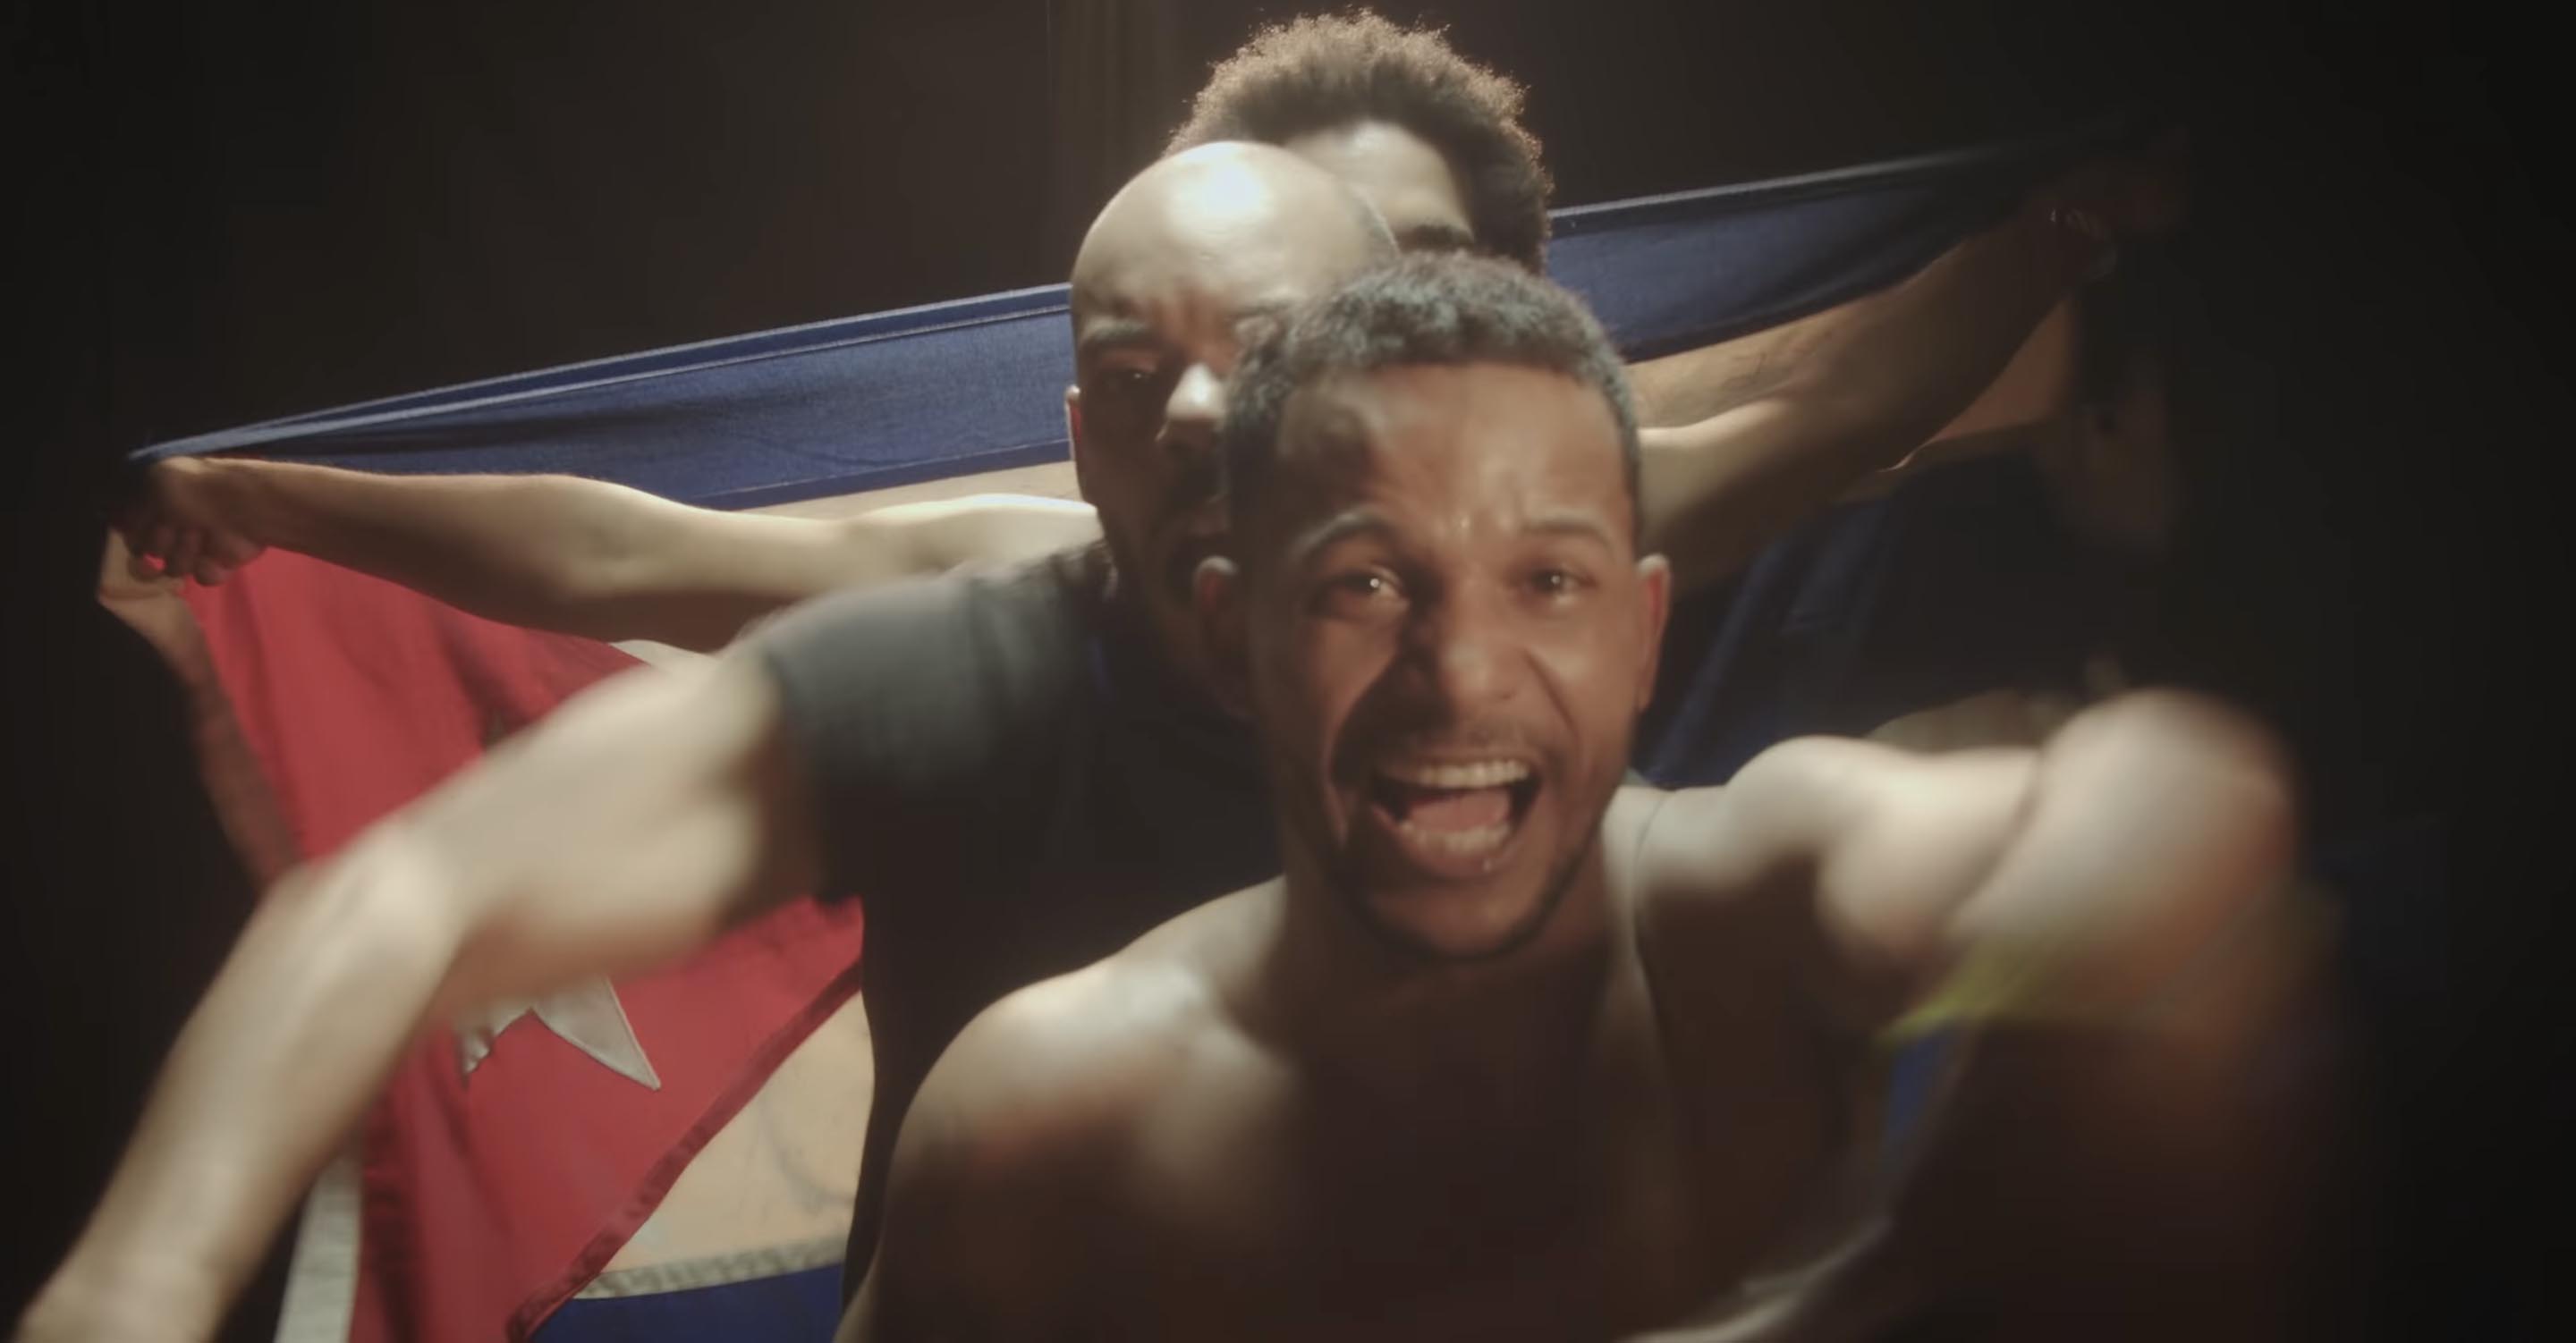 A screenshot from the video for "Patria y Vida," a song by several Cuban musicians that has become an anthem against the Cuban regime (NCR screenshot/YouTube/Yotuel)